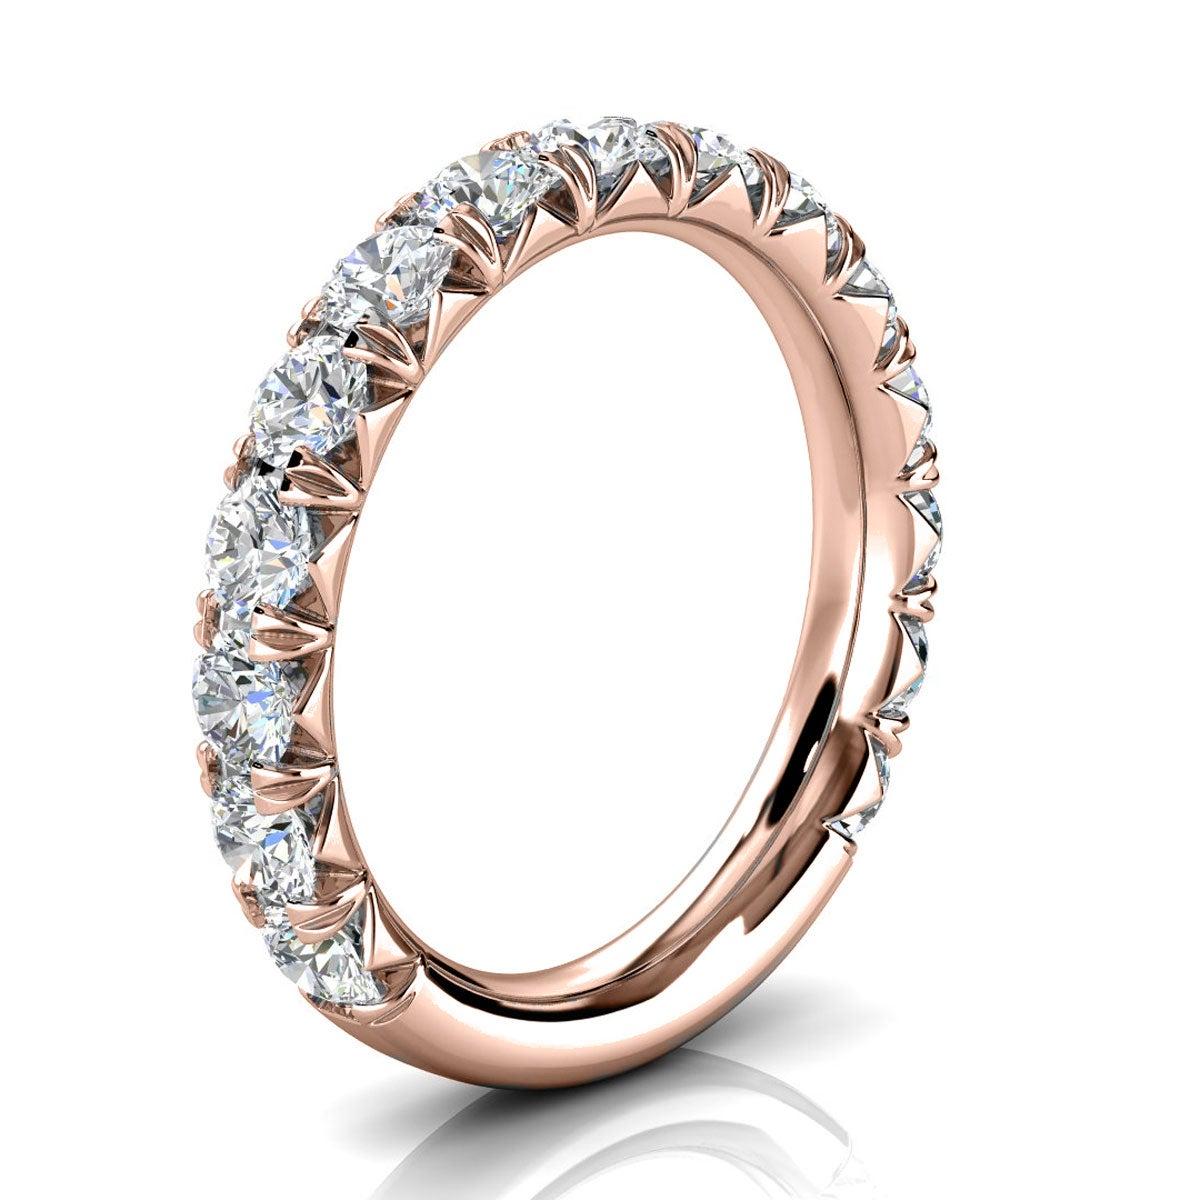 For Sale:  18k Rose Gold GIA French Pave Diamond Ring '1 1/2 Ct. Tw' 2